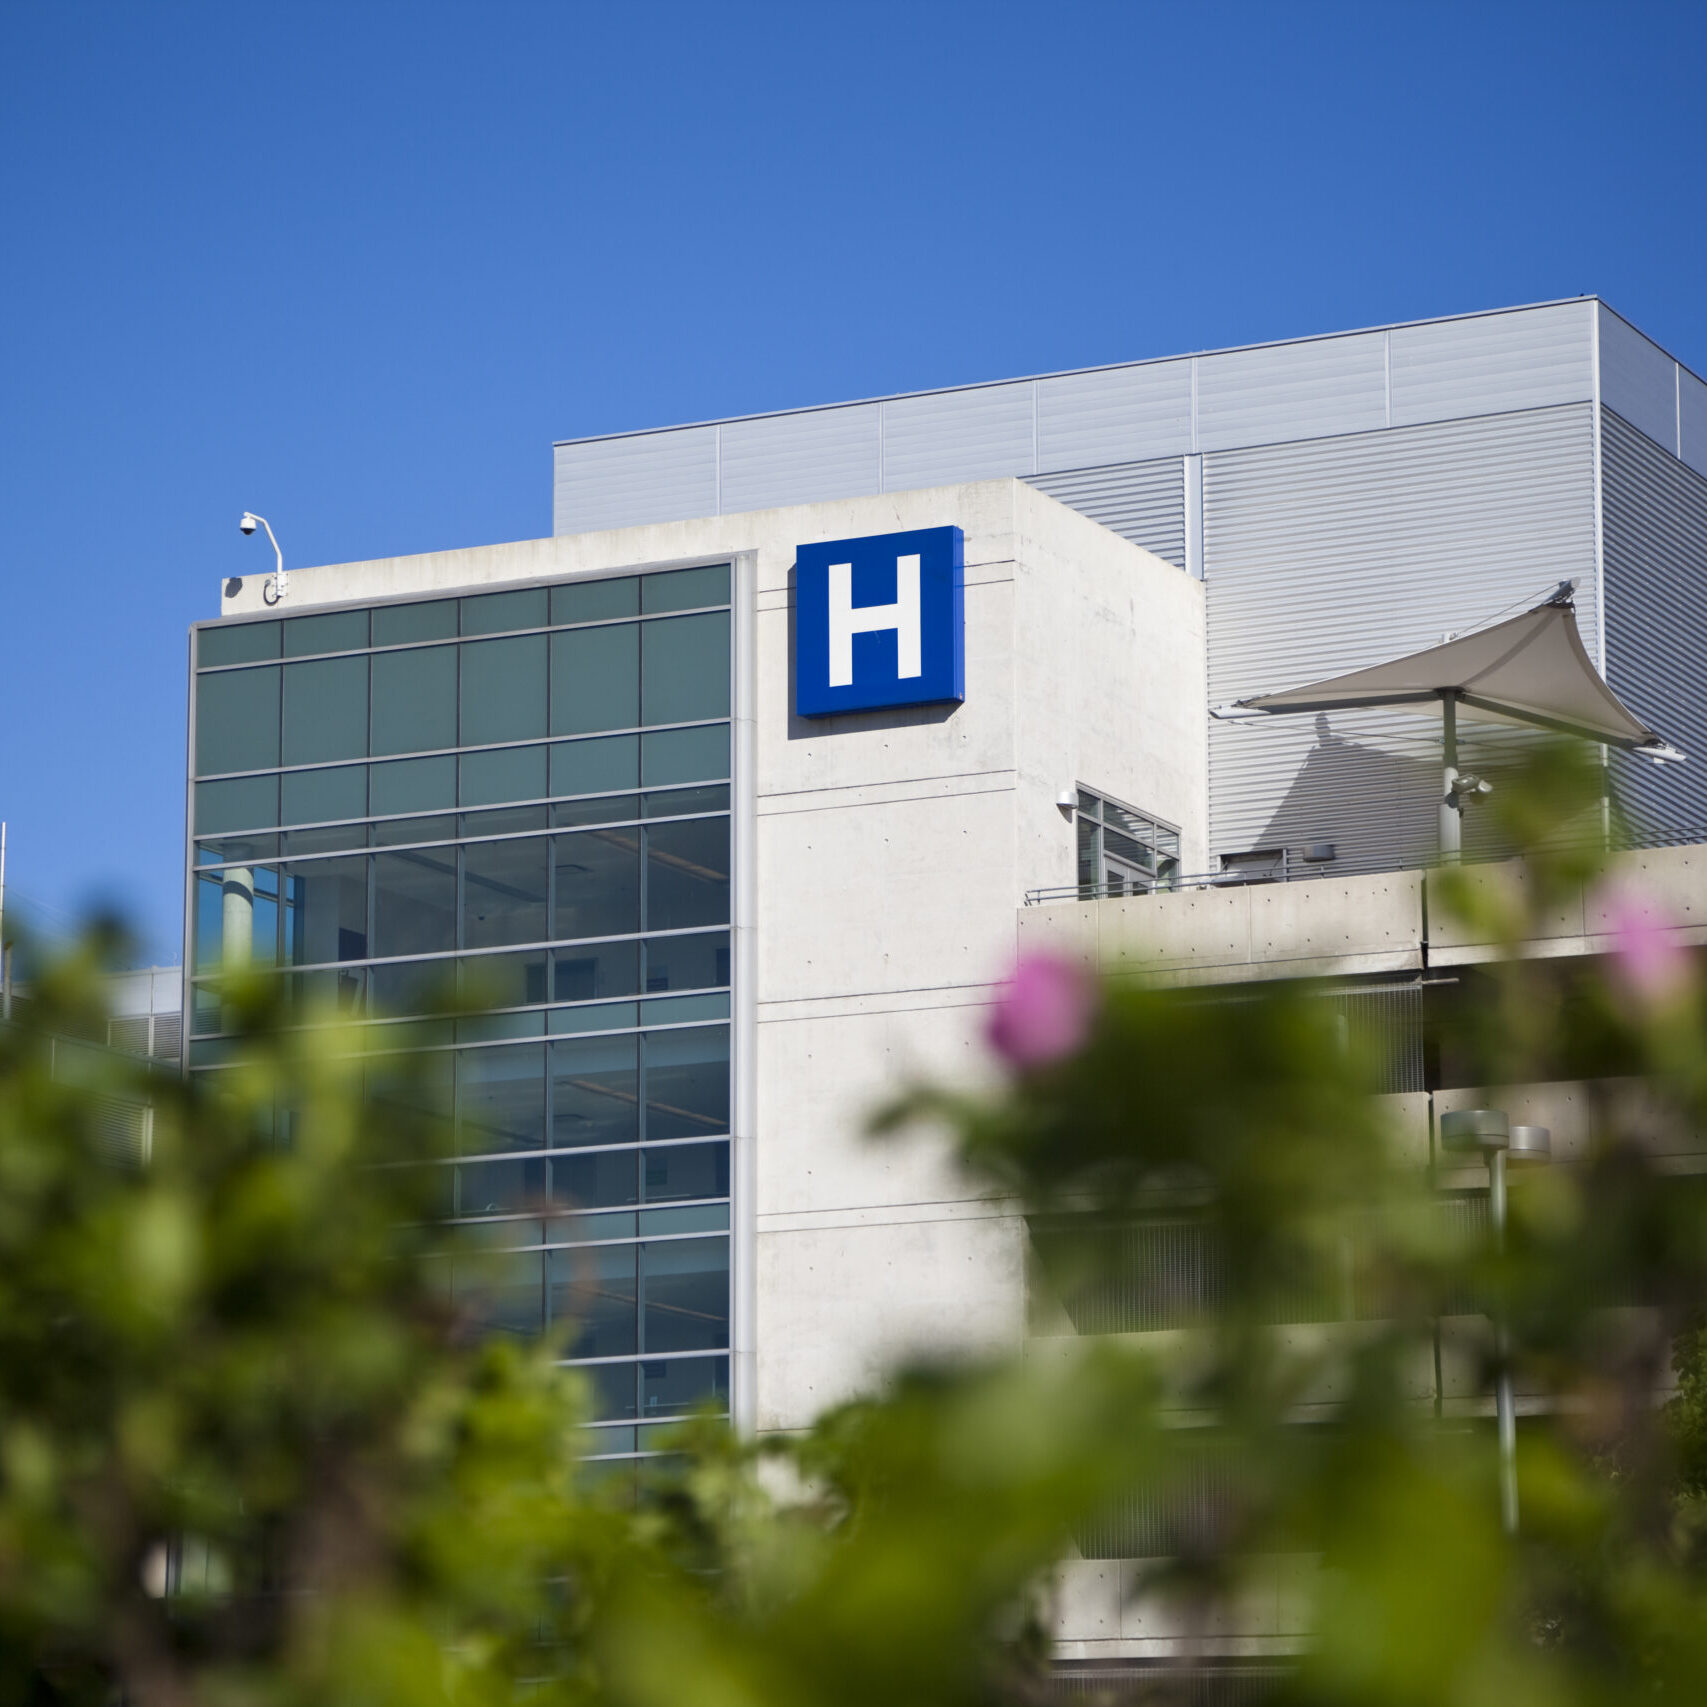 Modern,Hospital,And,Sign,With,Clear,Blue,Sky,Taken,In